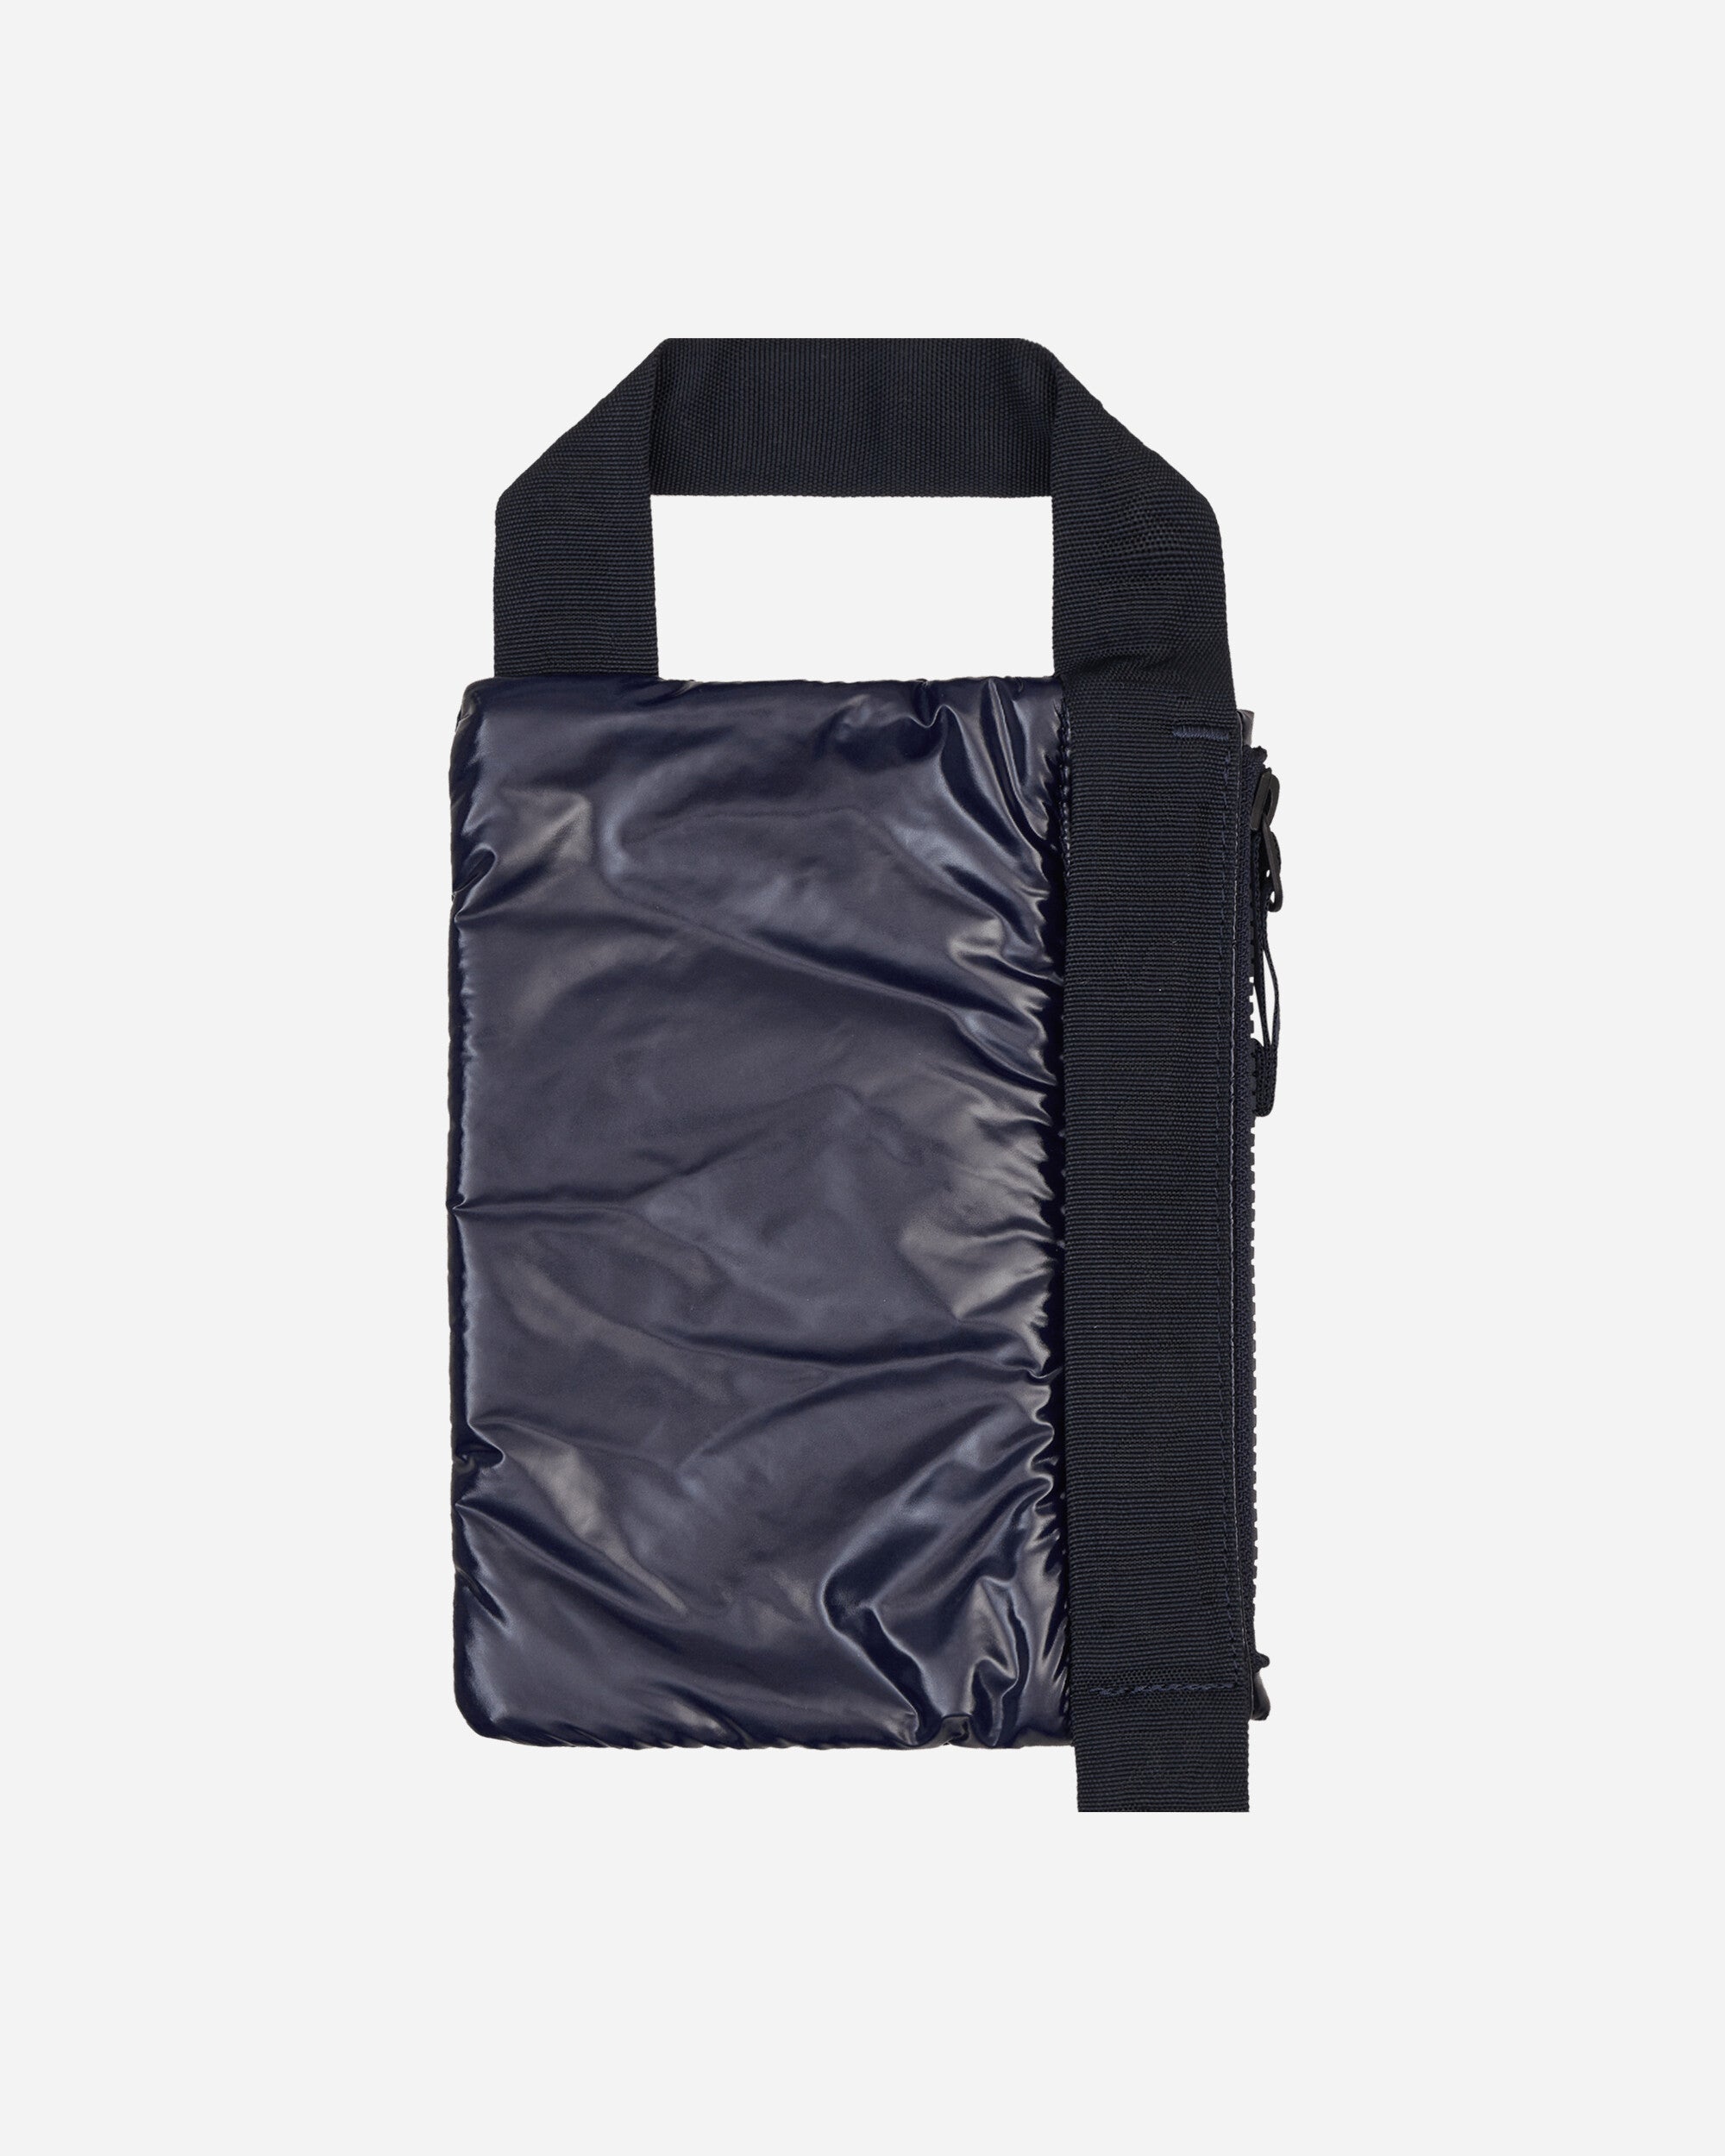 RAMIDUS and Carhartt WIP Present New Bag Collection